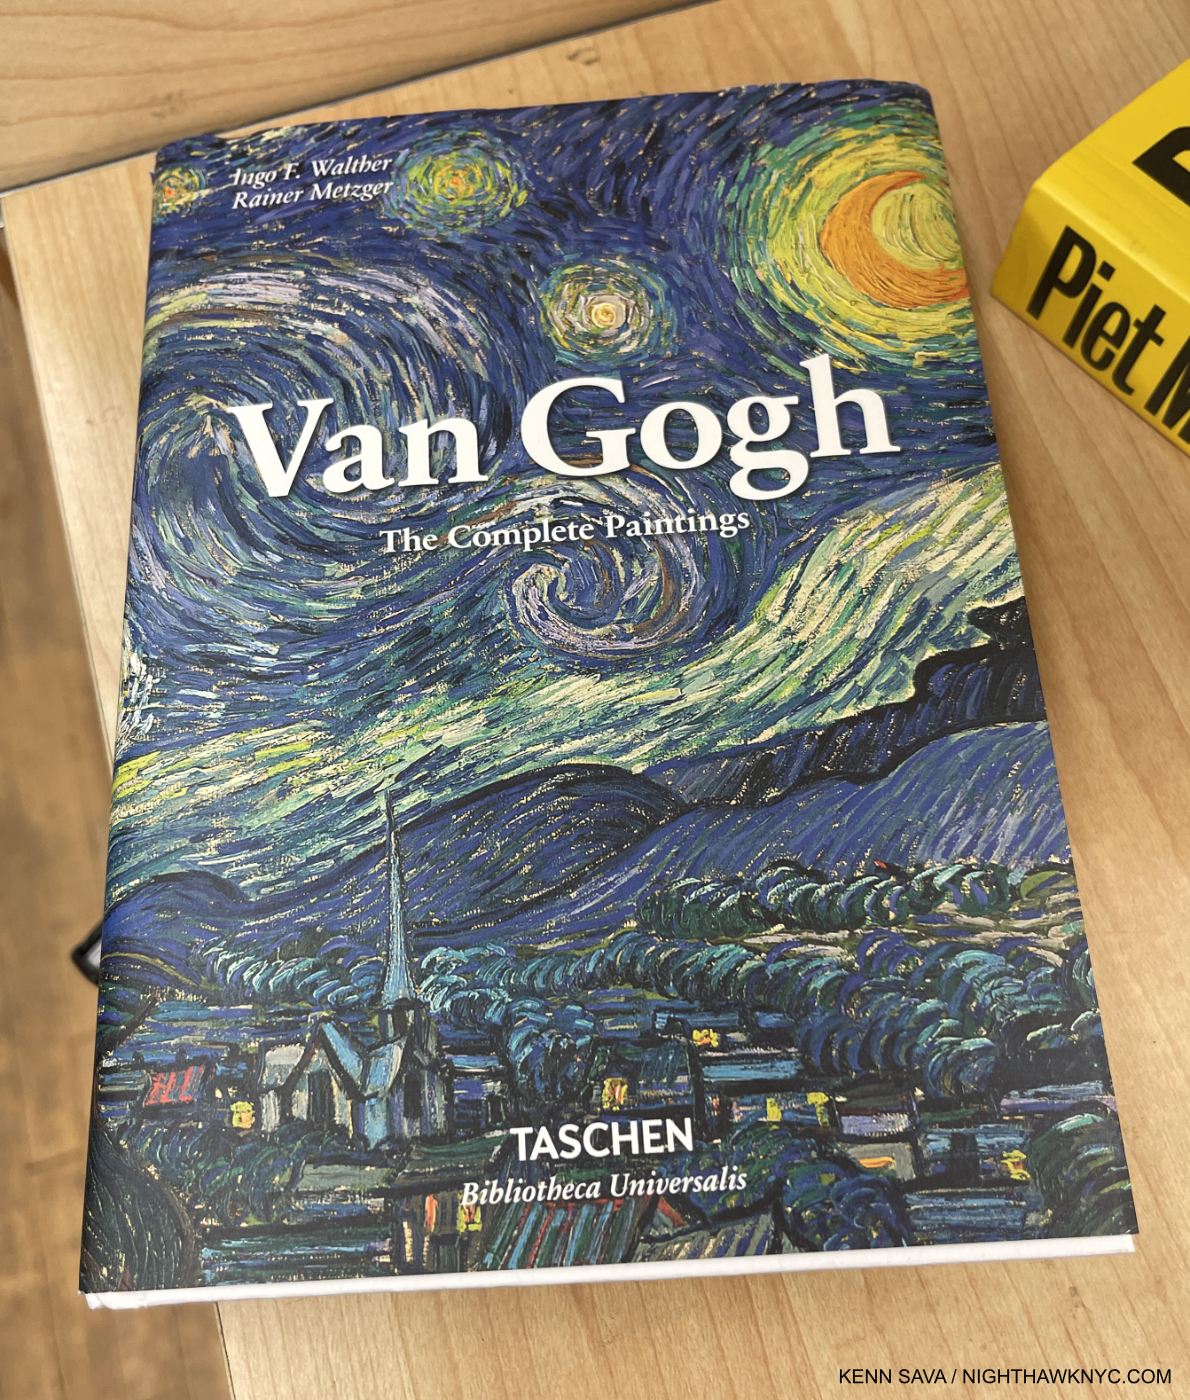 TASCHEN Books: Discover Van Gogh. The Complete Paintings.